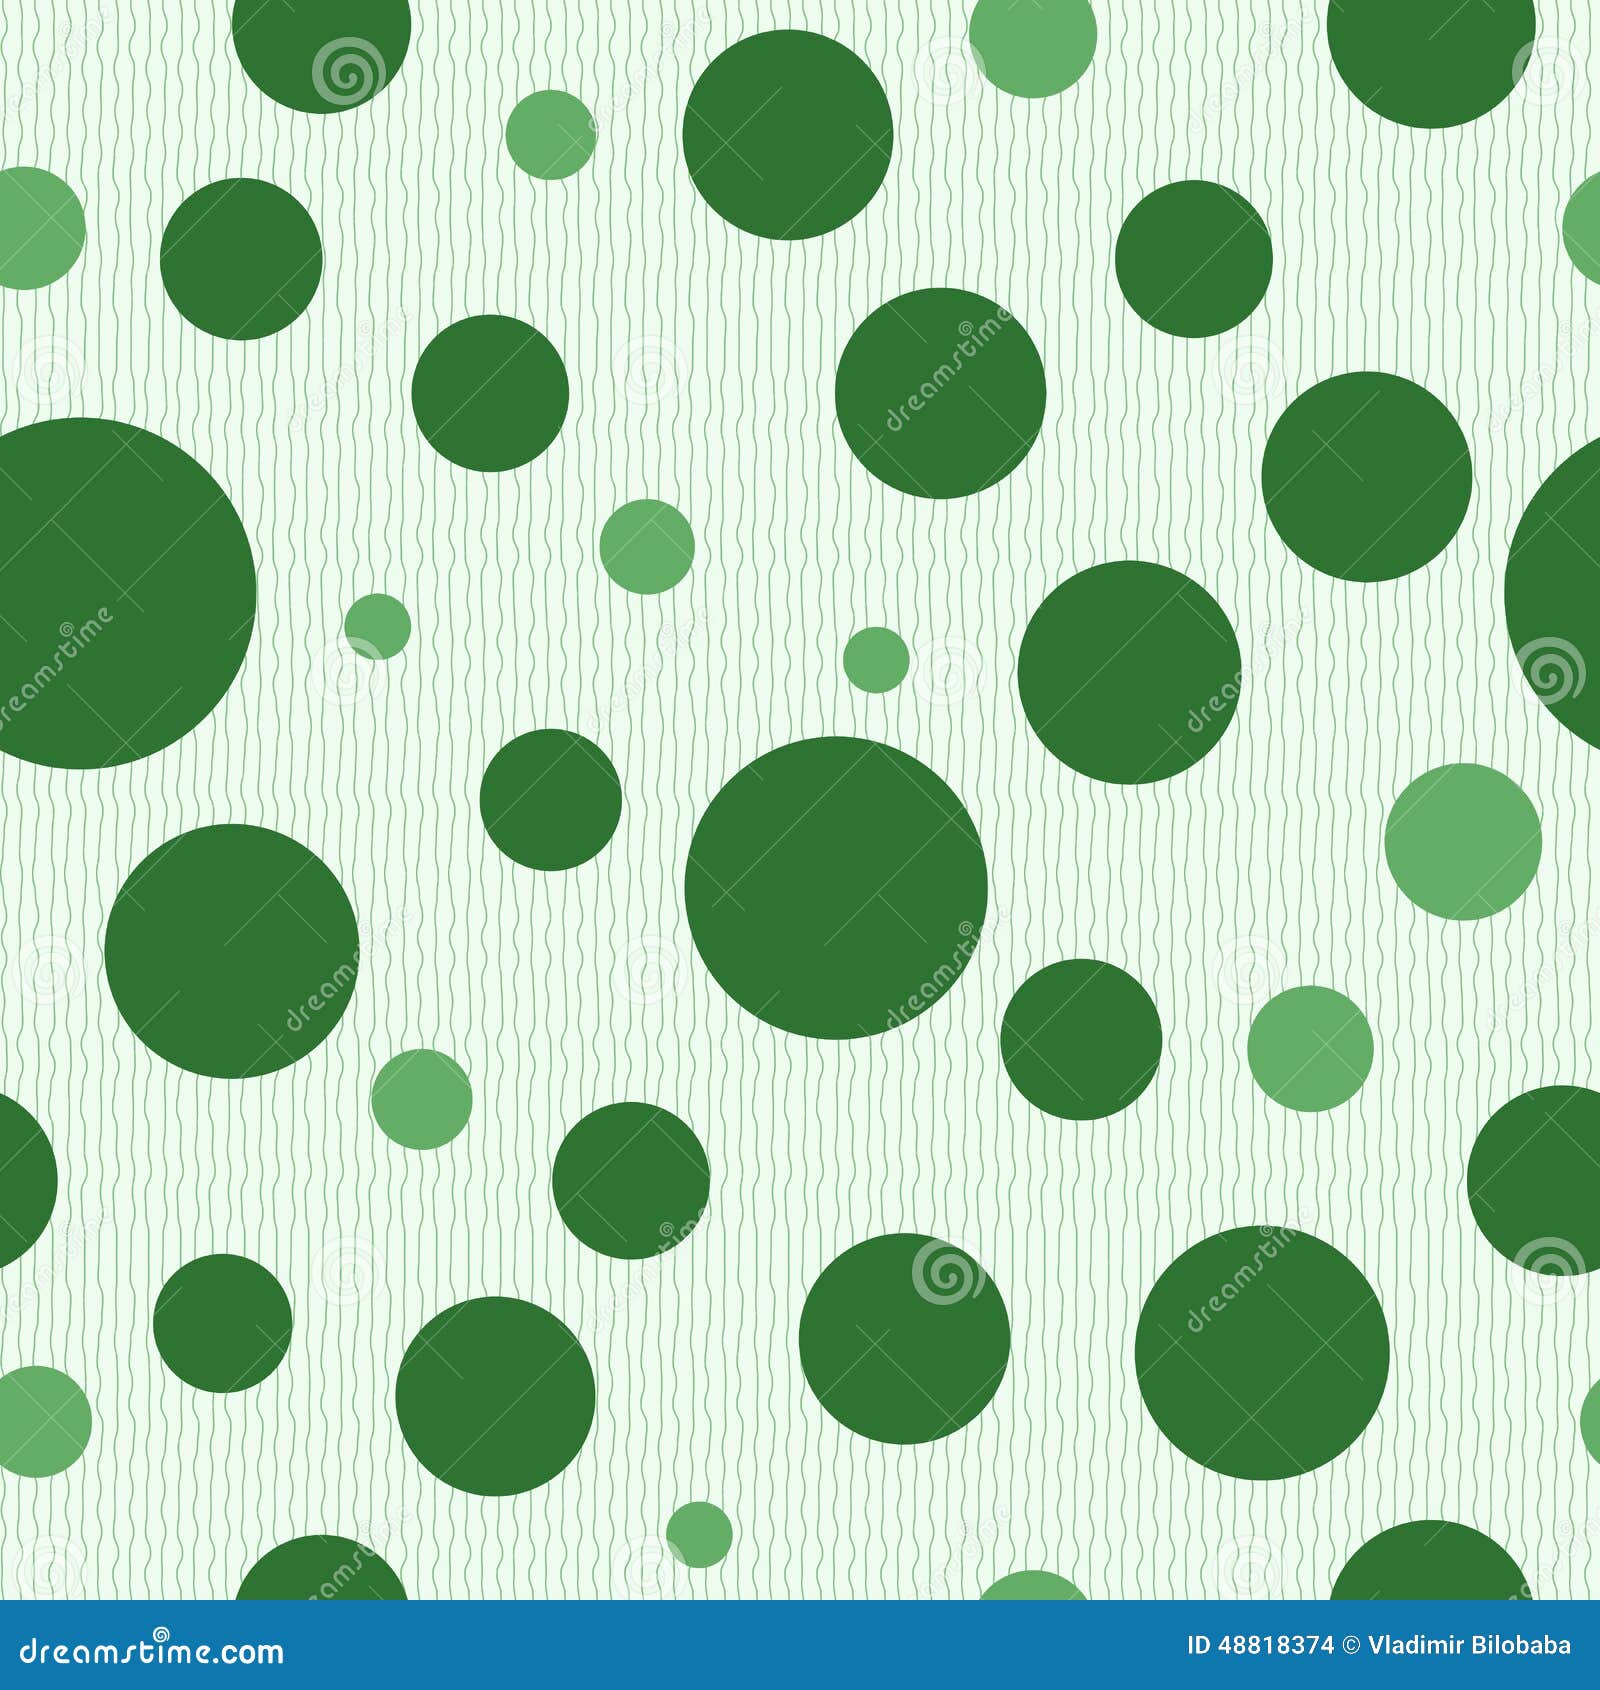 Background of Green Circles Stock Vector - Illustration of line, round ...